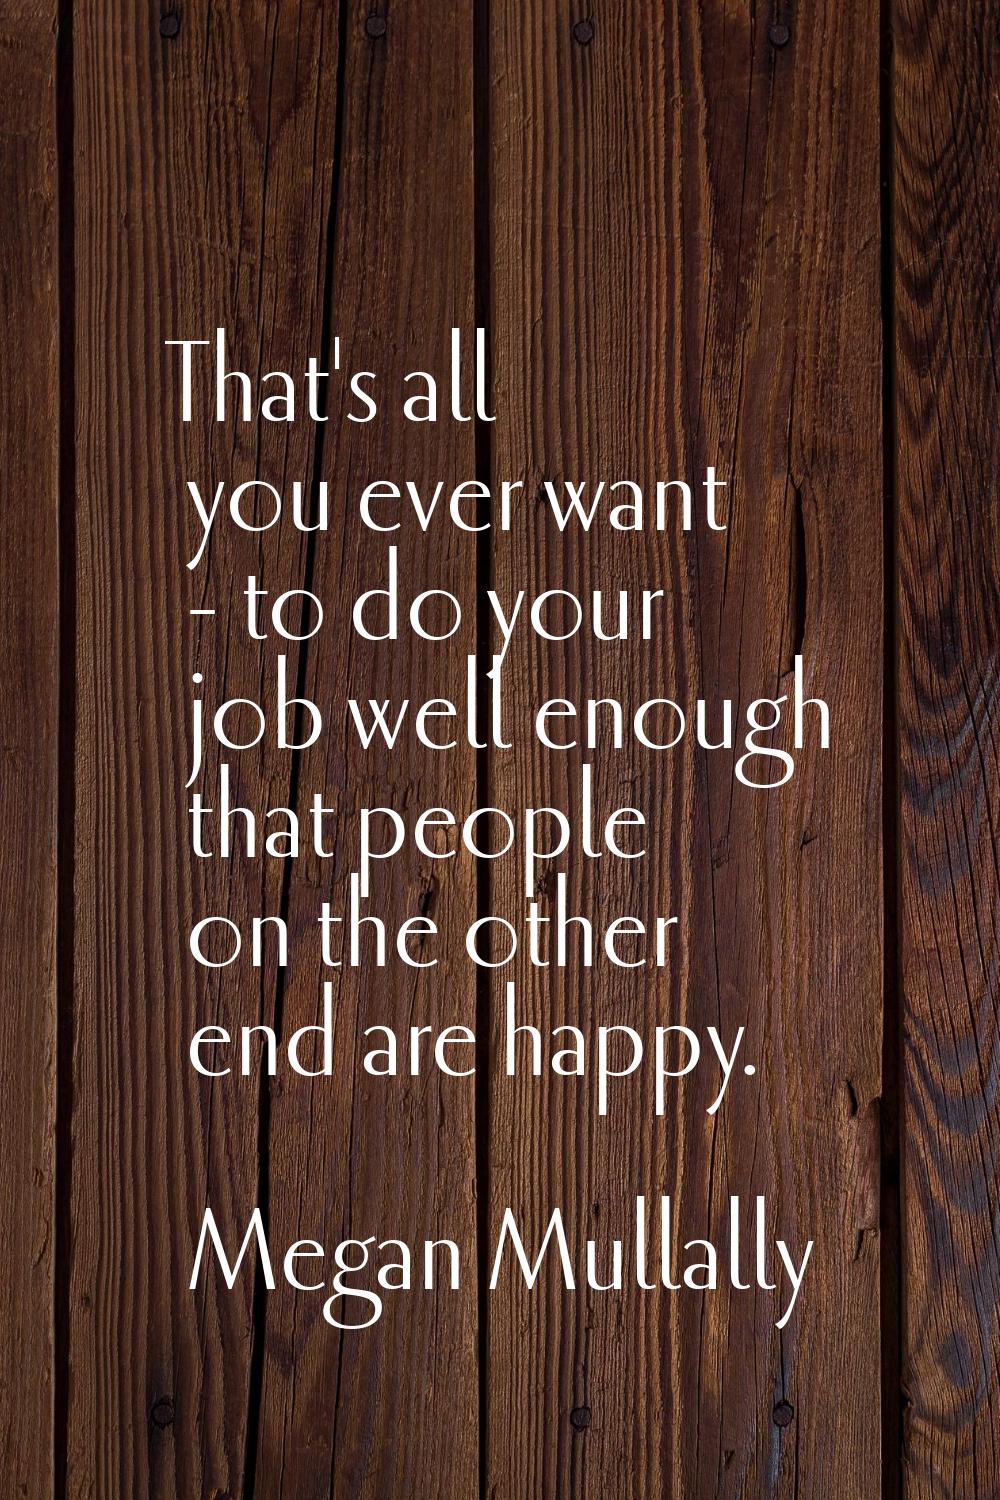 That's all you ever want - to do your job well enough that people on the other end are happy.